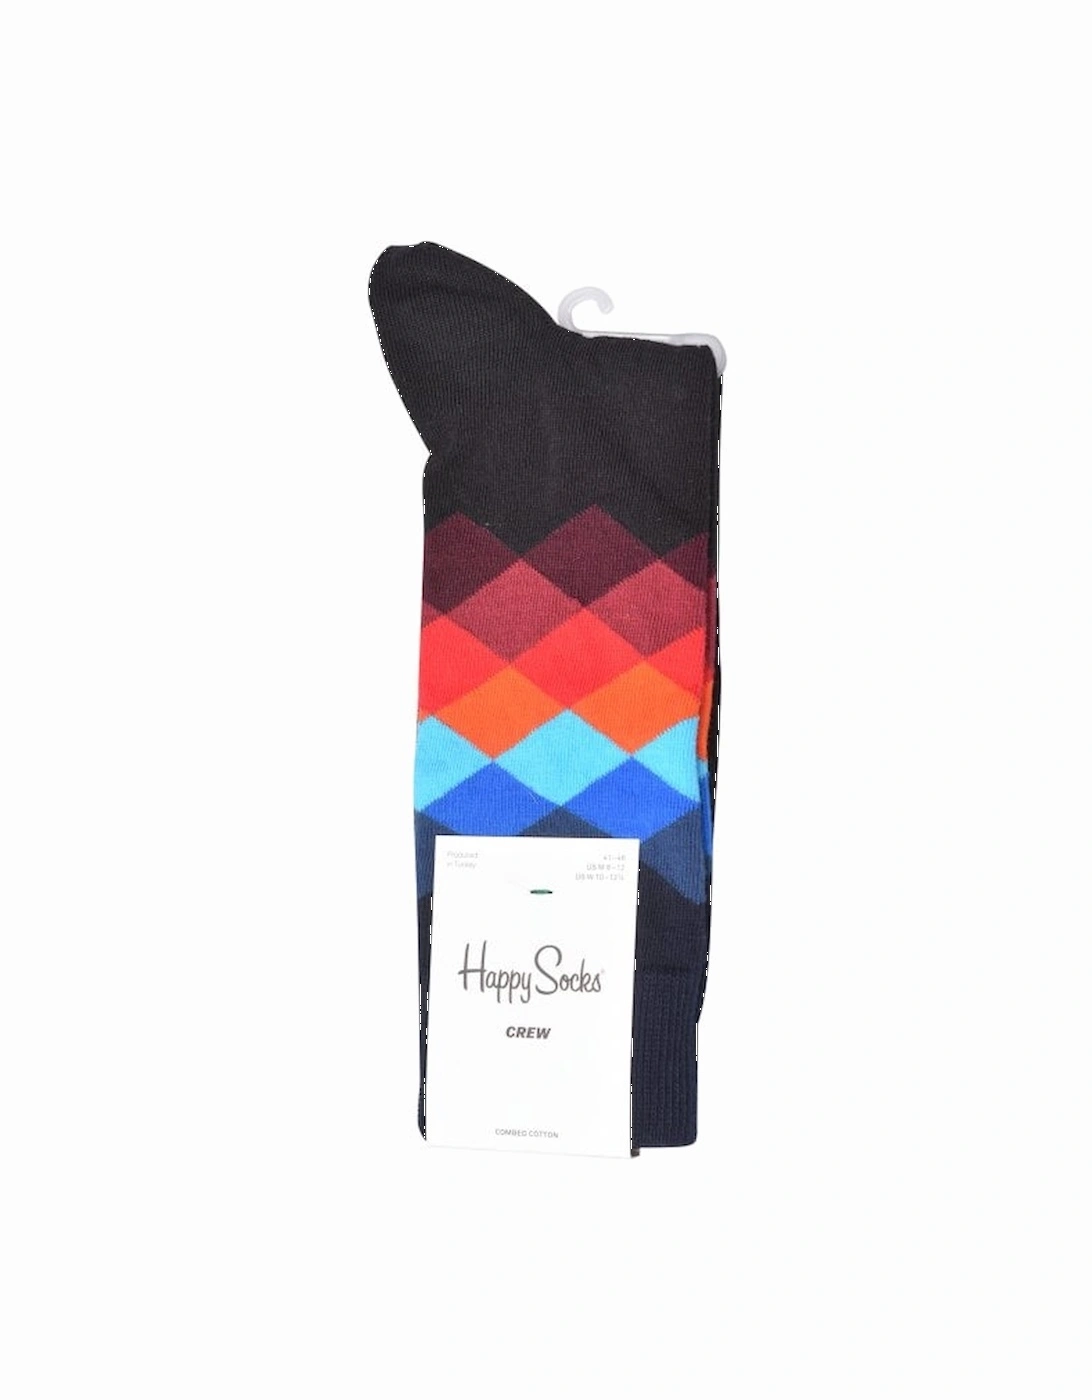 Faded Diamond Socks, Navy with red/blue